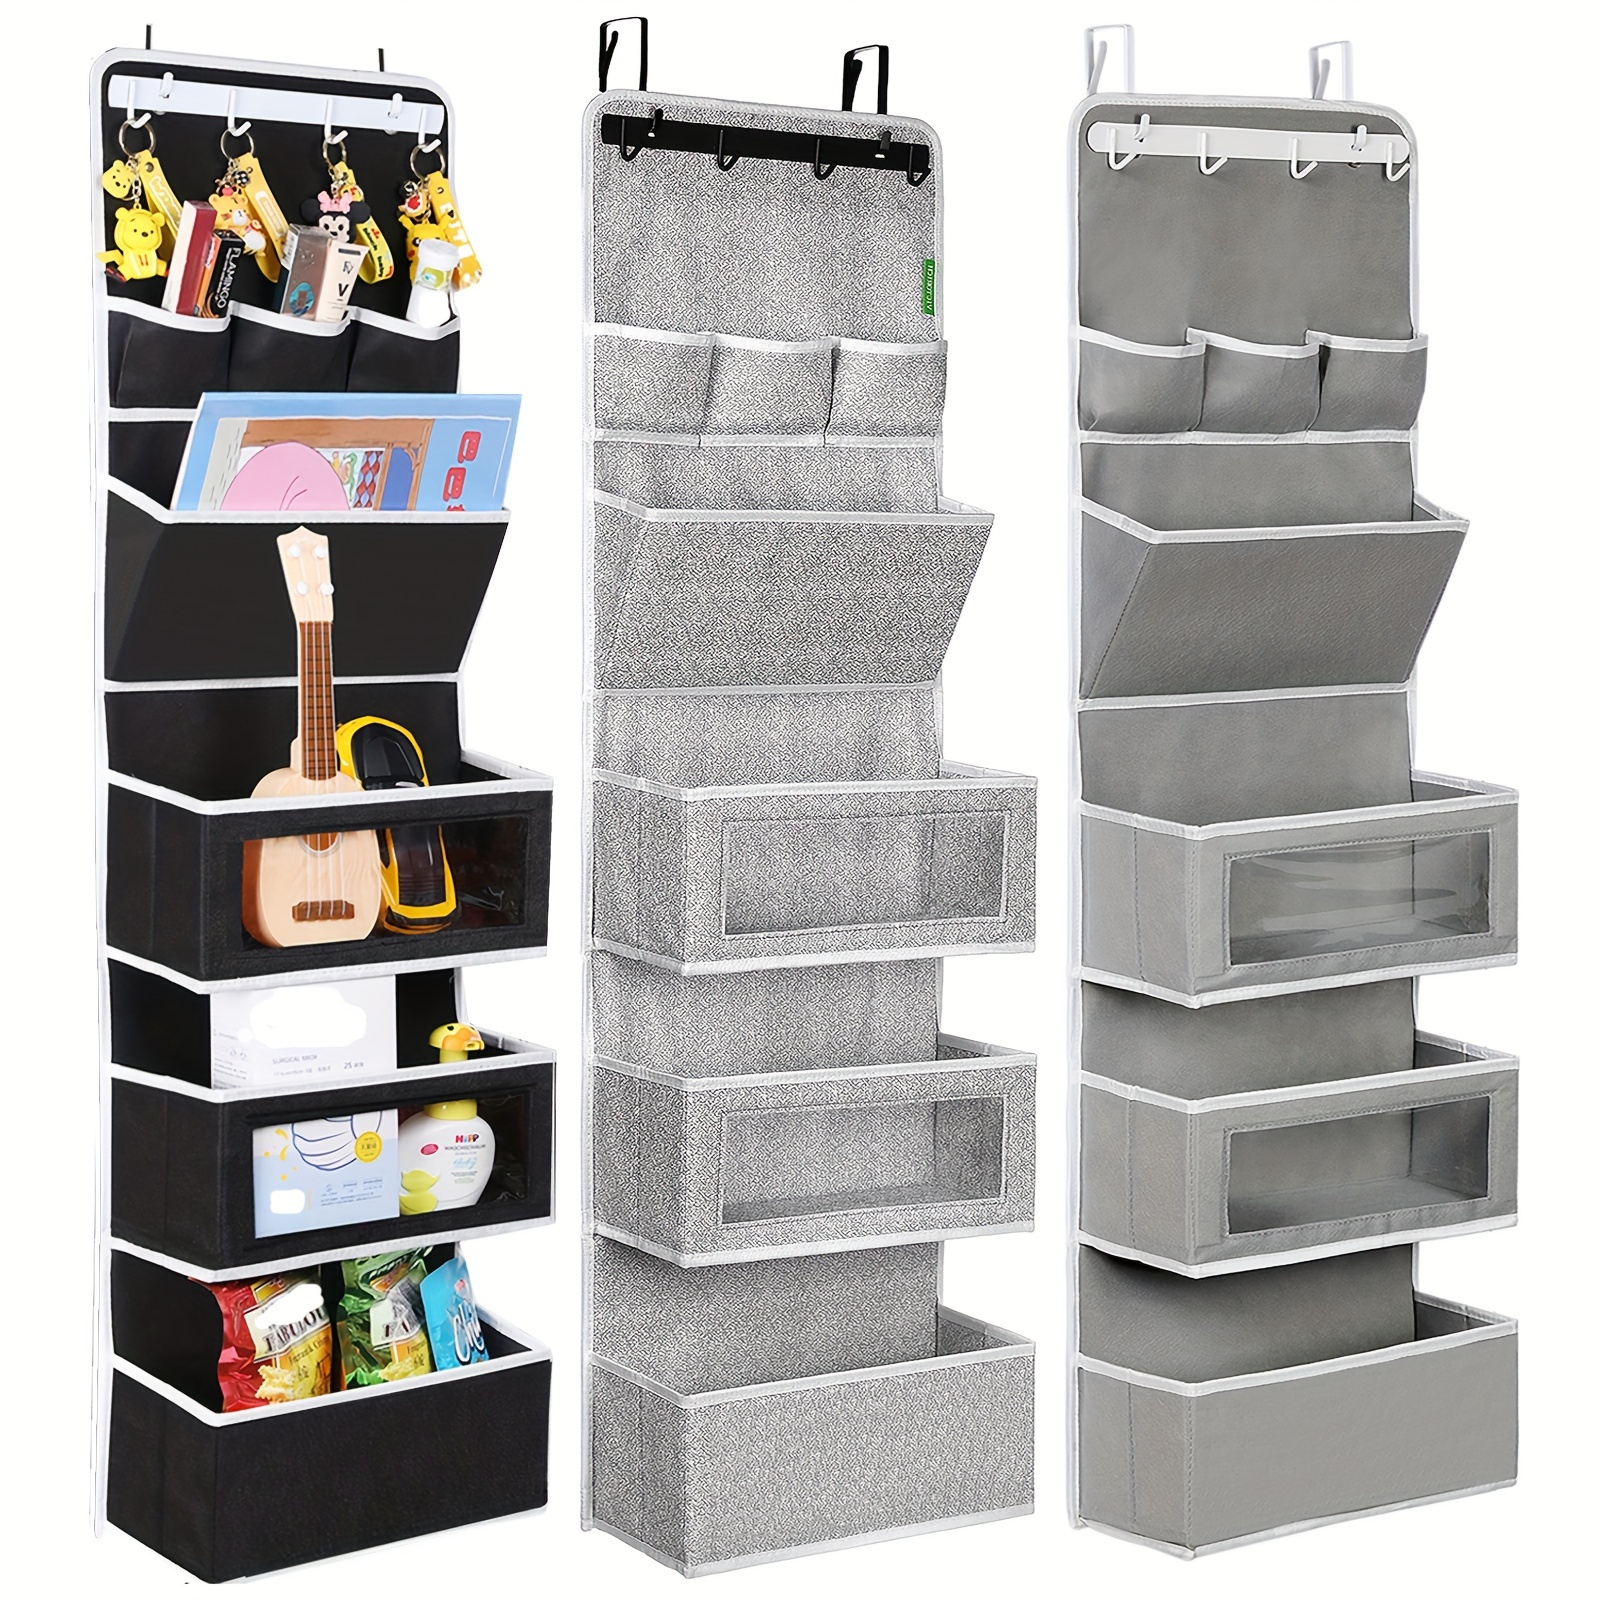 

Home Storage Hanging Organizer All-in-one Over The Door Organizer, Super Behind The Door Storage Organizer With Door Rack And Large Clear Windows, Wall File Organizer, Hanging Organizer Large Capacity